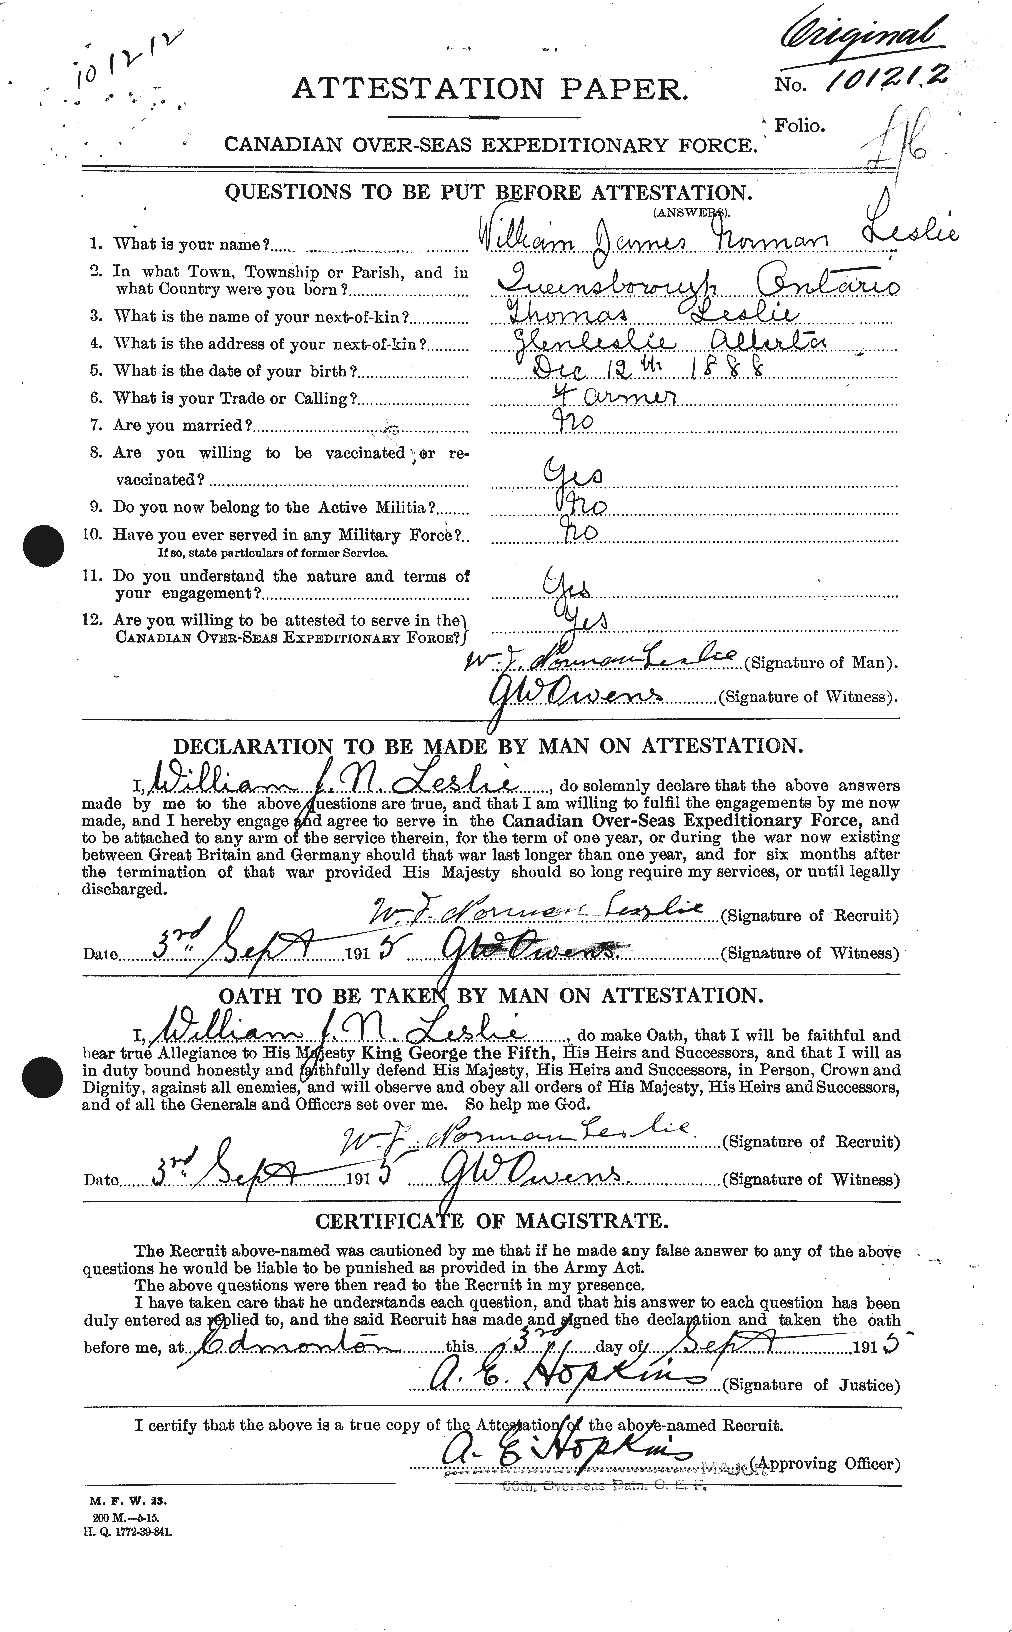 Personnel Records of the First World War - CEF 460335a